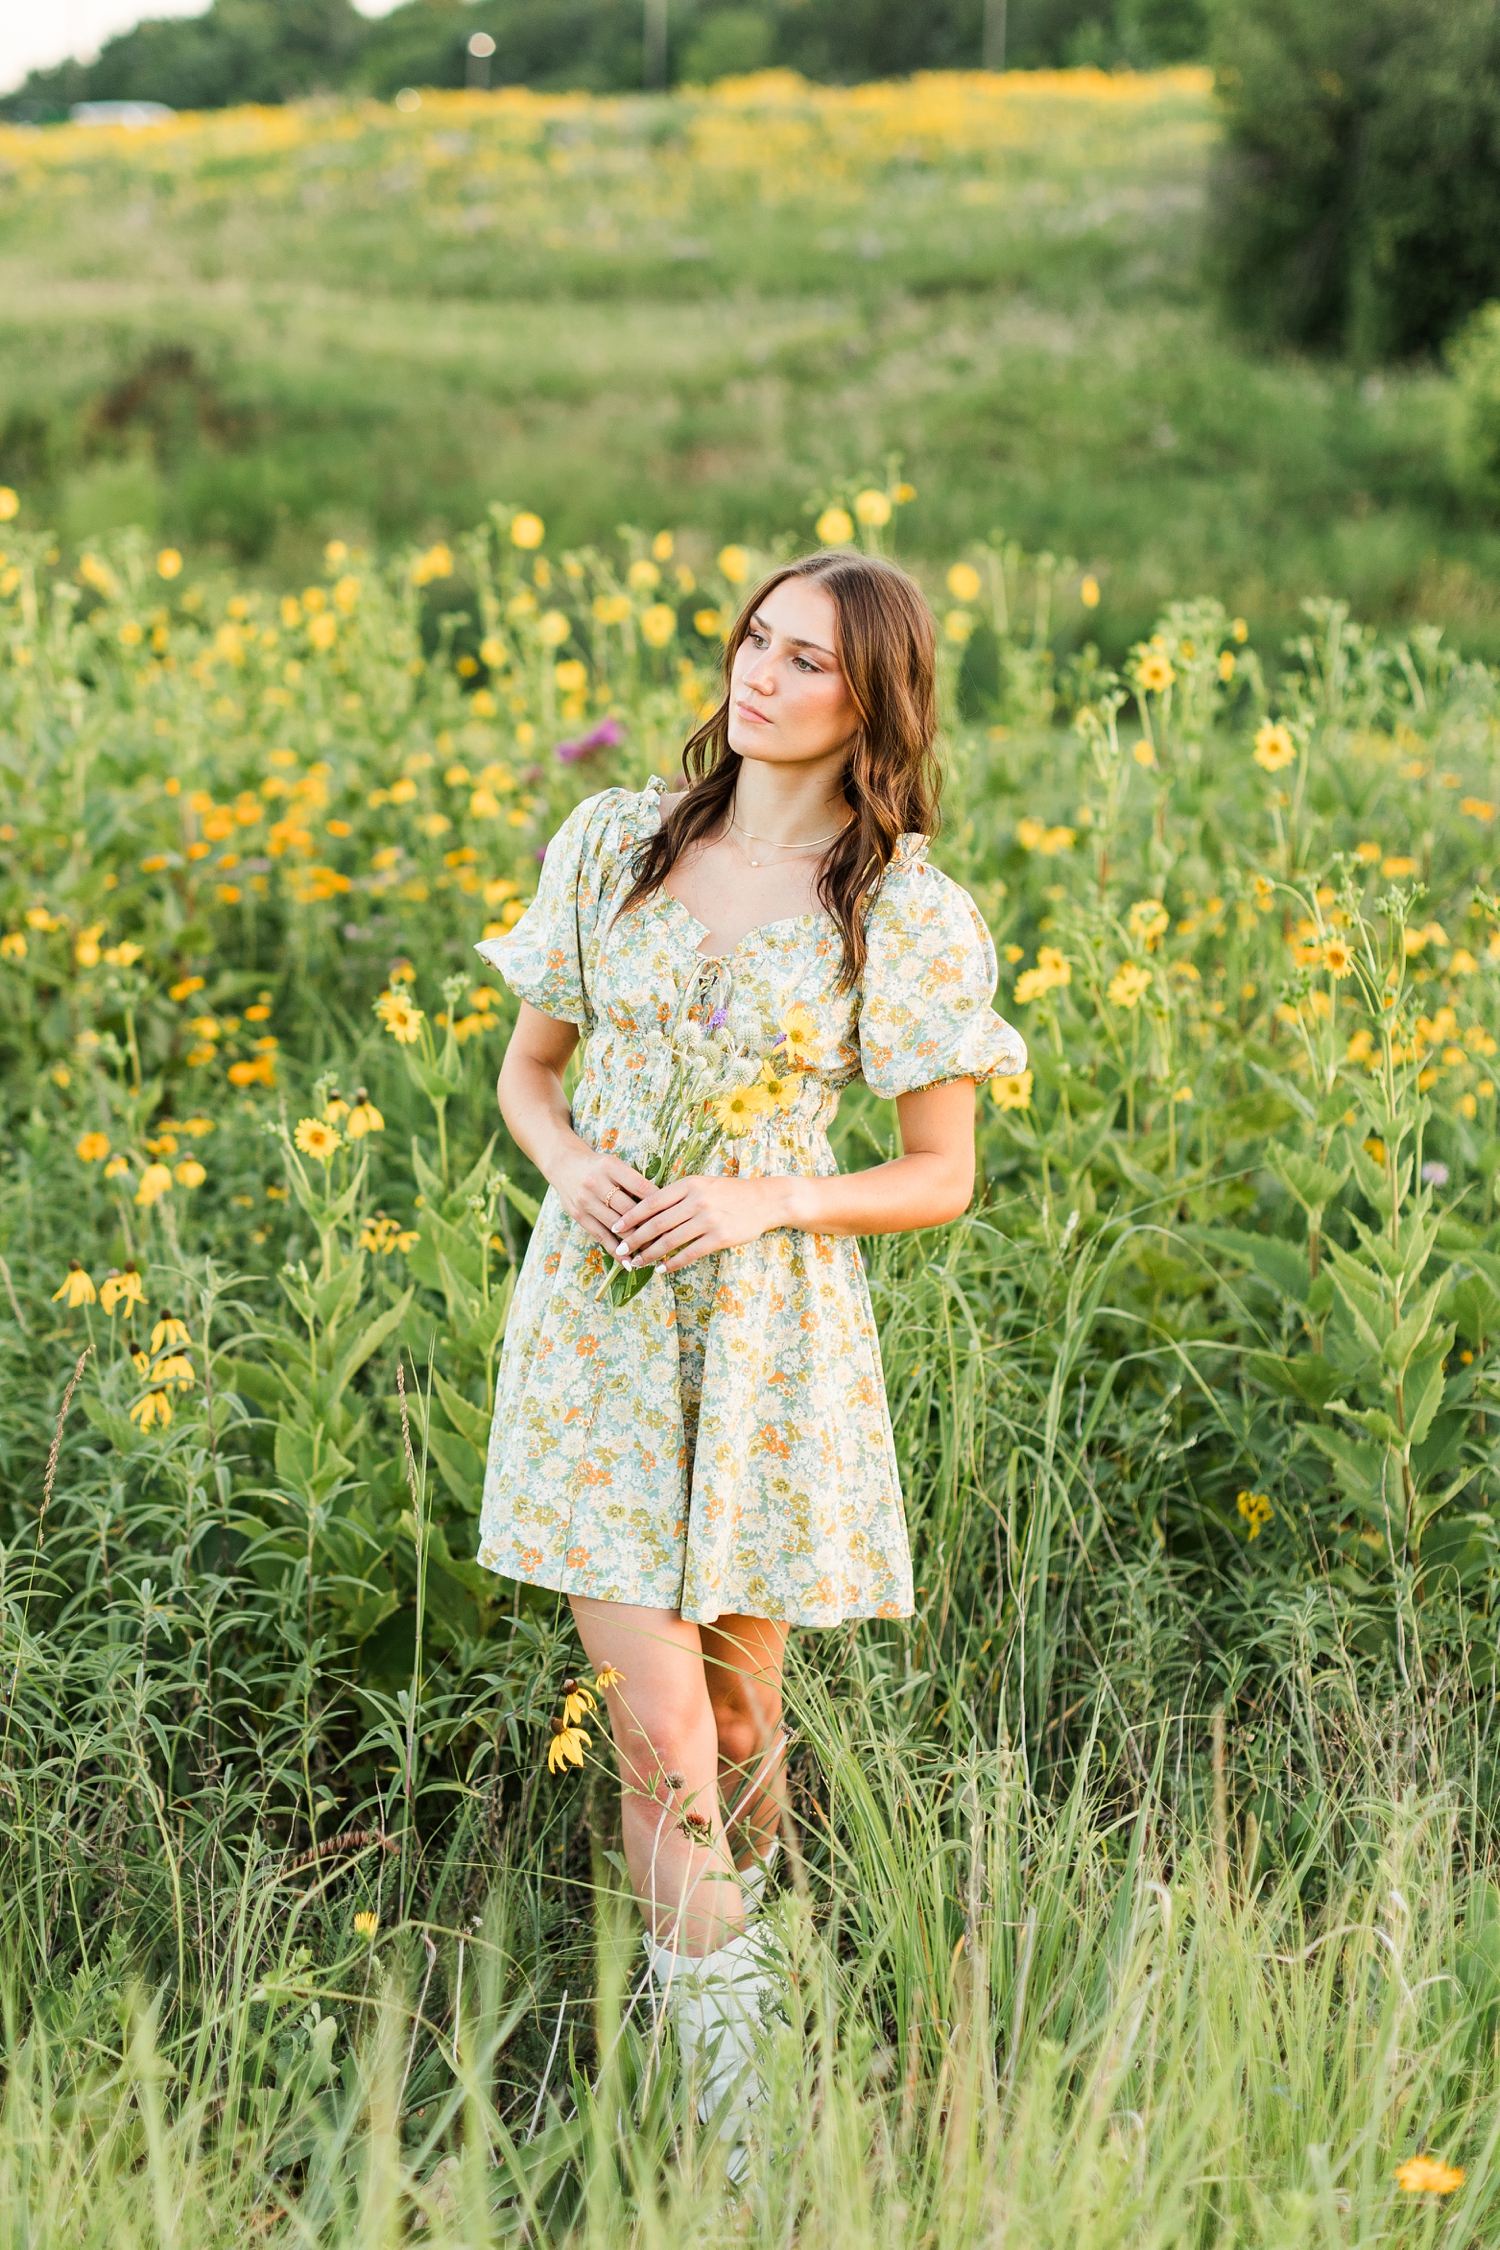 Mallory holds a wildflower bouquet in a field of yellow wildflowers wearing a green and yellow floral dress | CB Studio